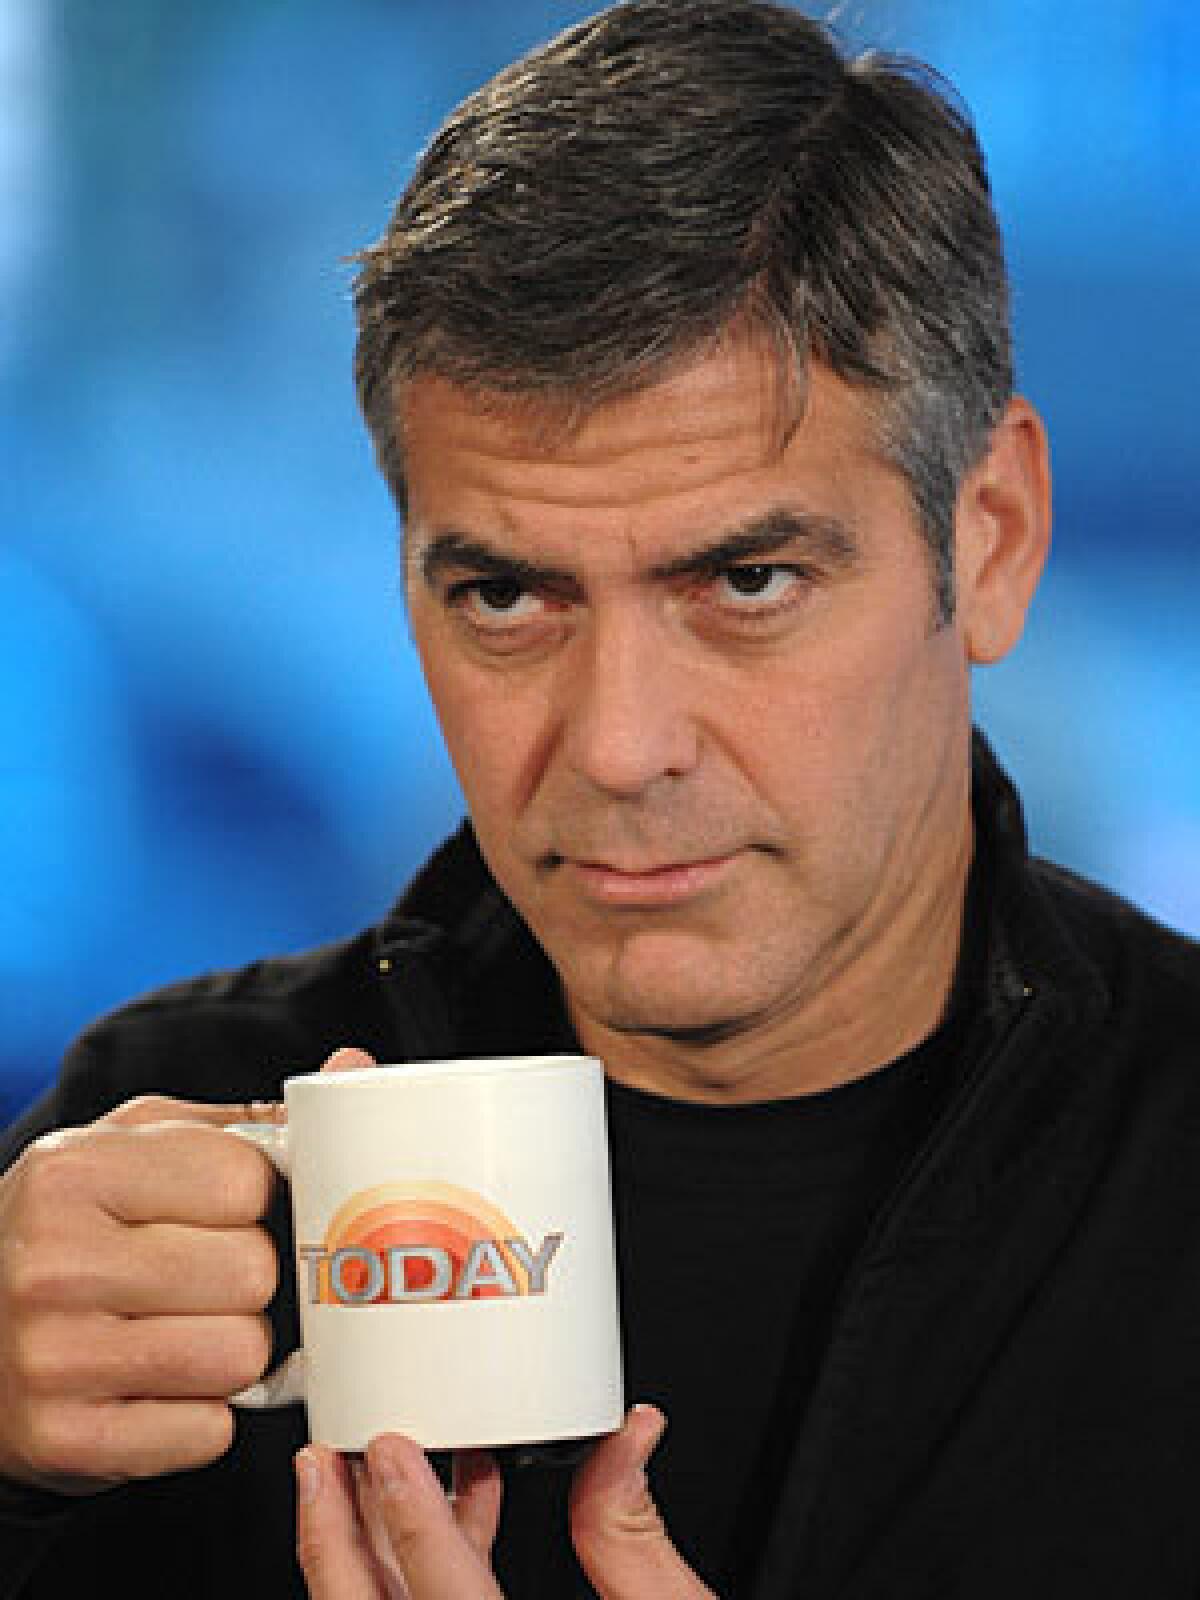 Clooney makes an appearance on NBC's "The Today Show", to promote his new movie "Leatherheads."